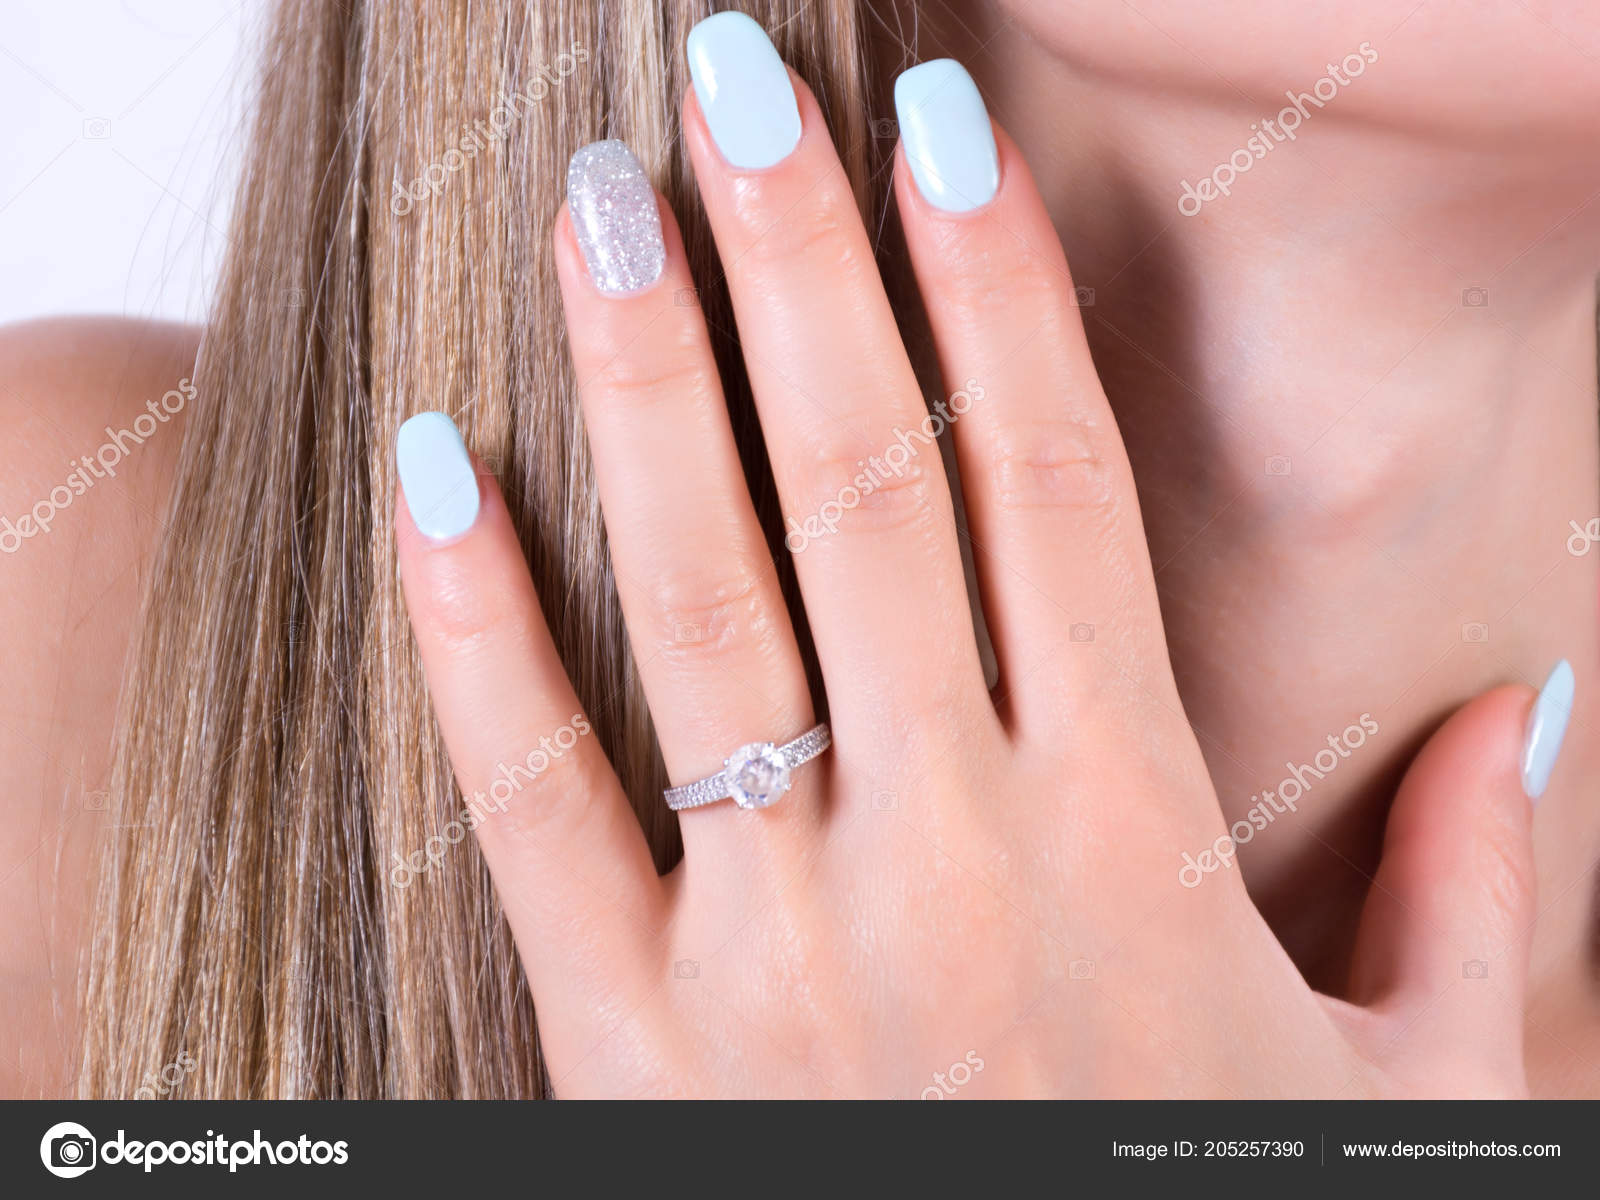 Premium Photo | Gentle female hands of the bride with a gold wedding ring  on the ring finger